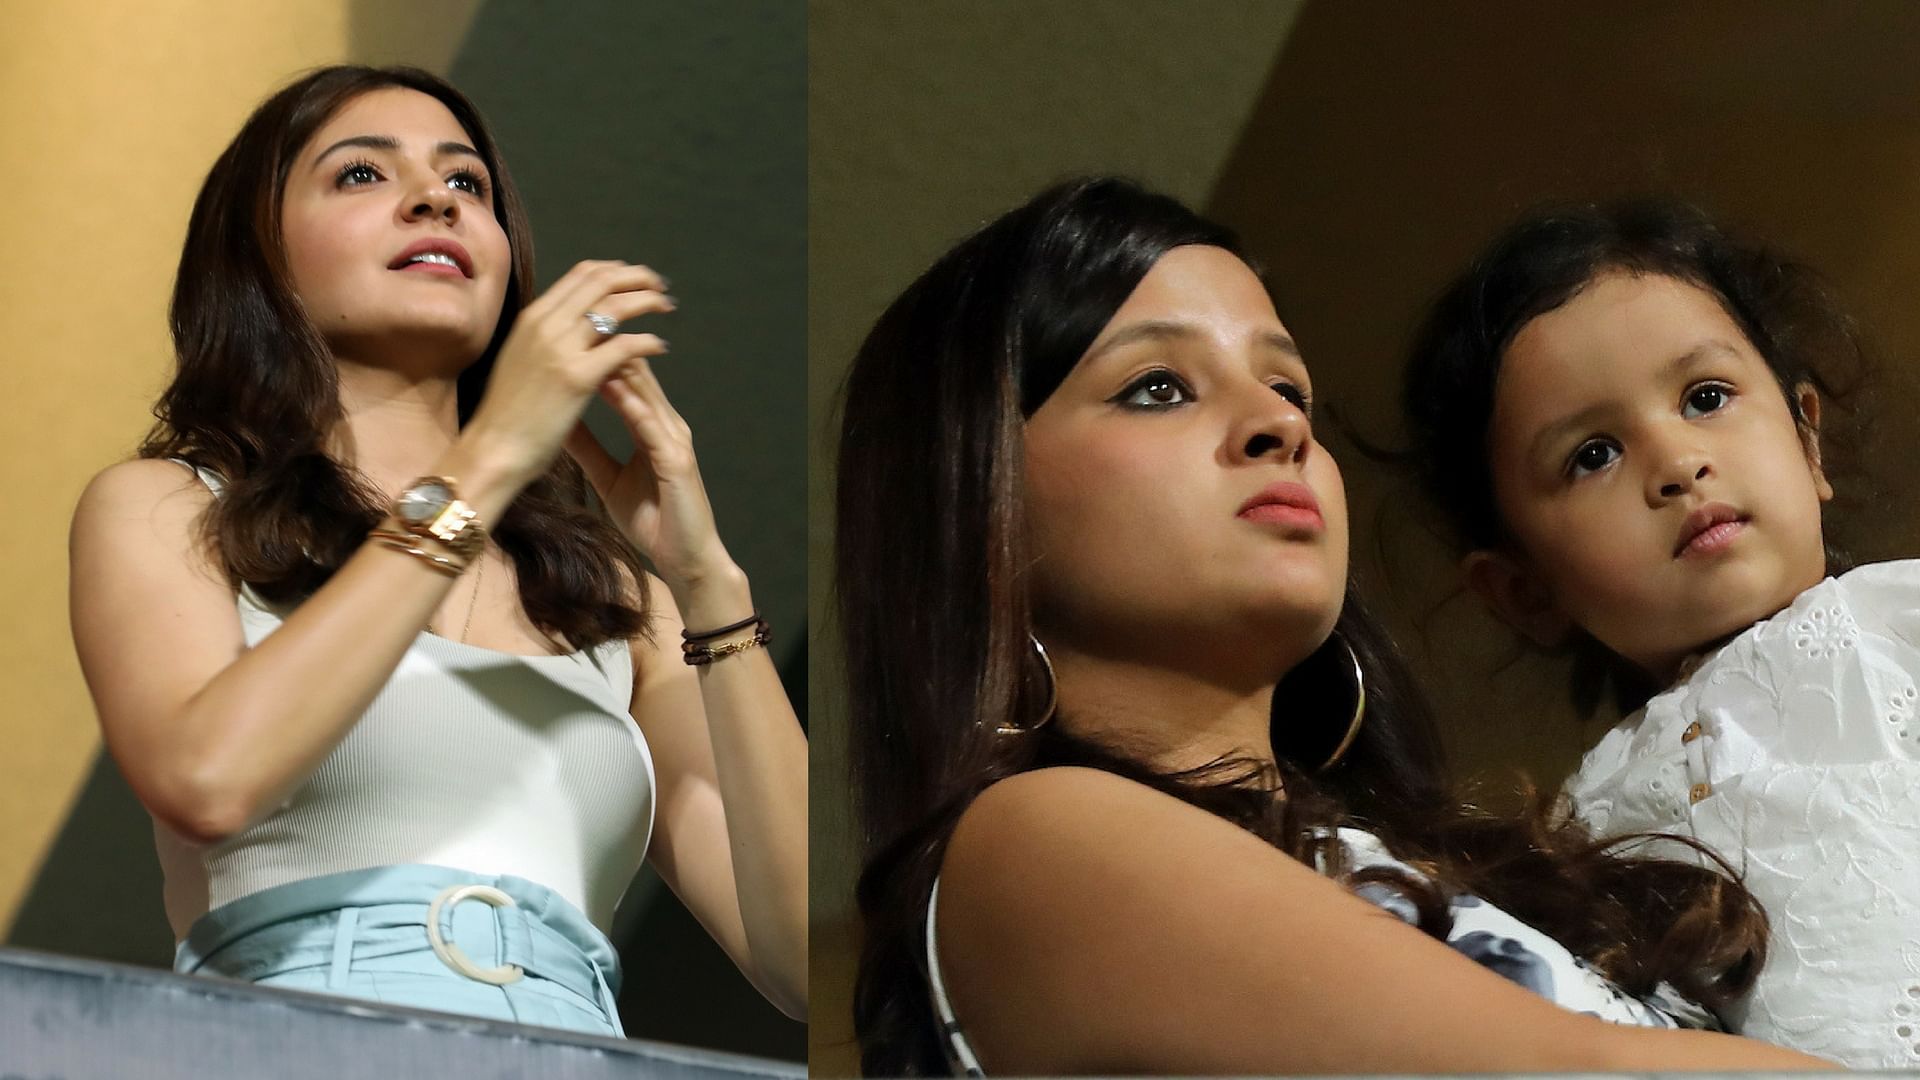 Anushka Sharma and Sakshi Dhoni with daughter Ziva at the IPL match between Chennai Super Kings and Royal Challengers Bangalore on Wednesday.